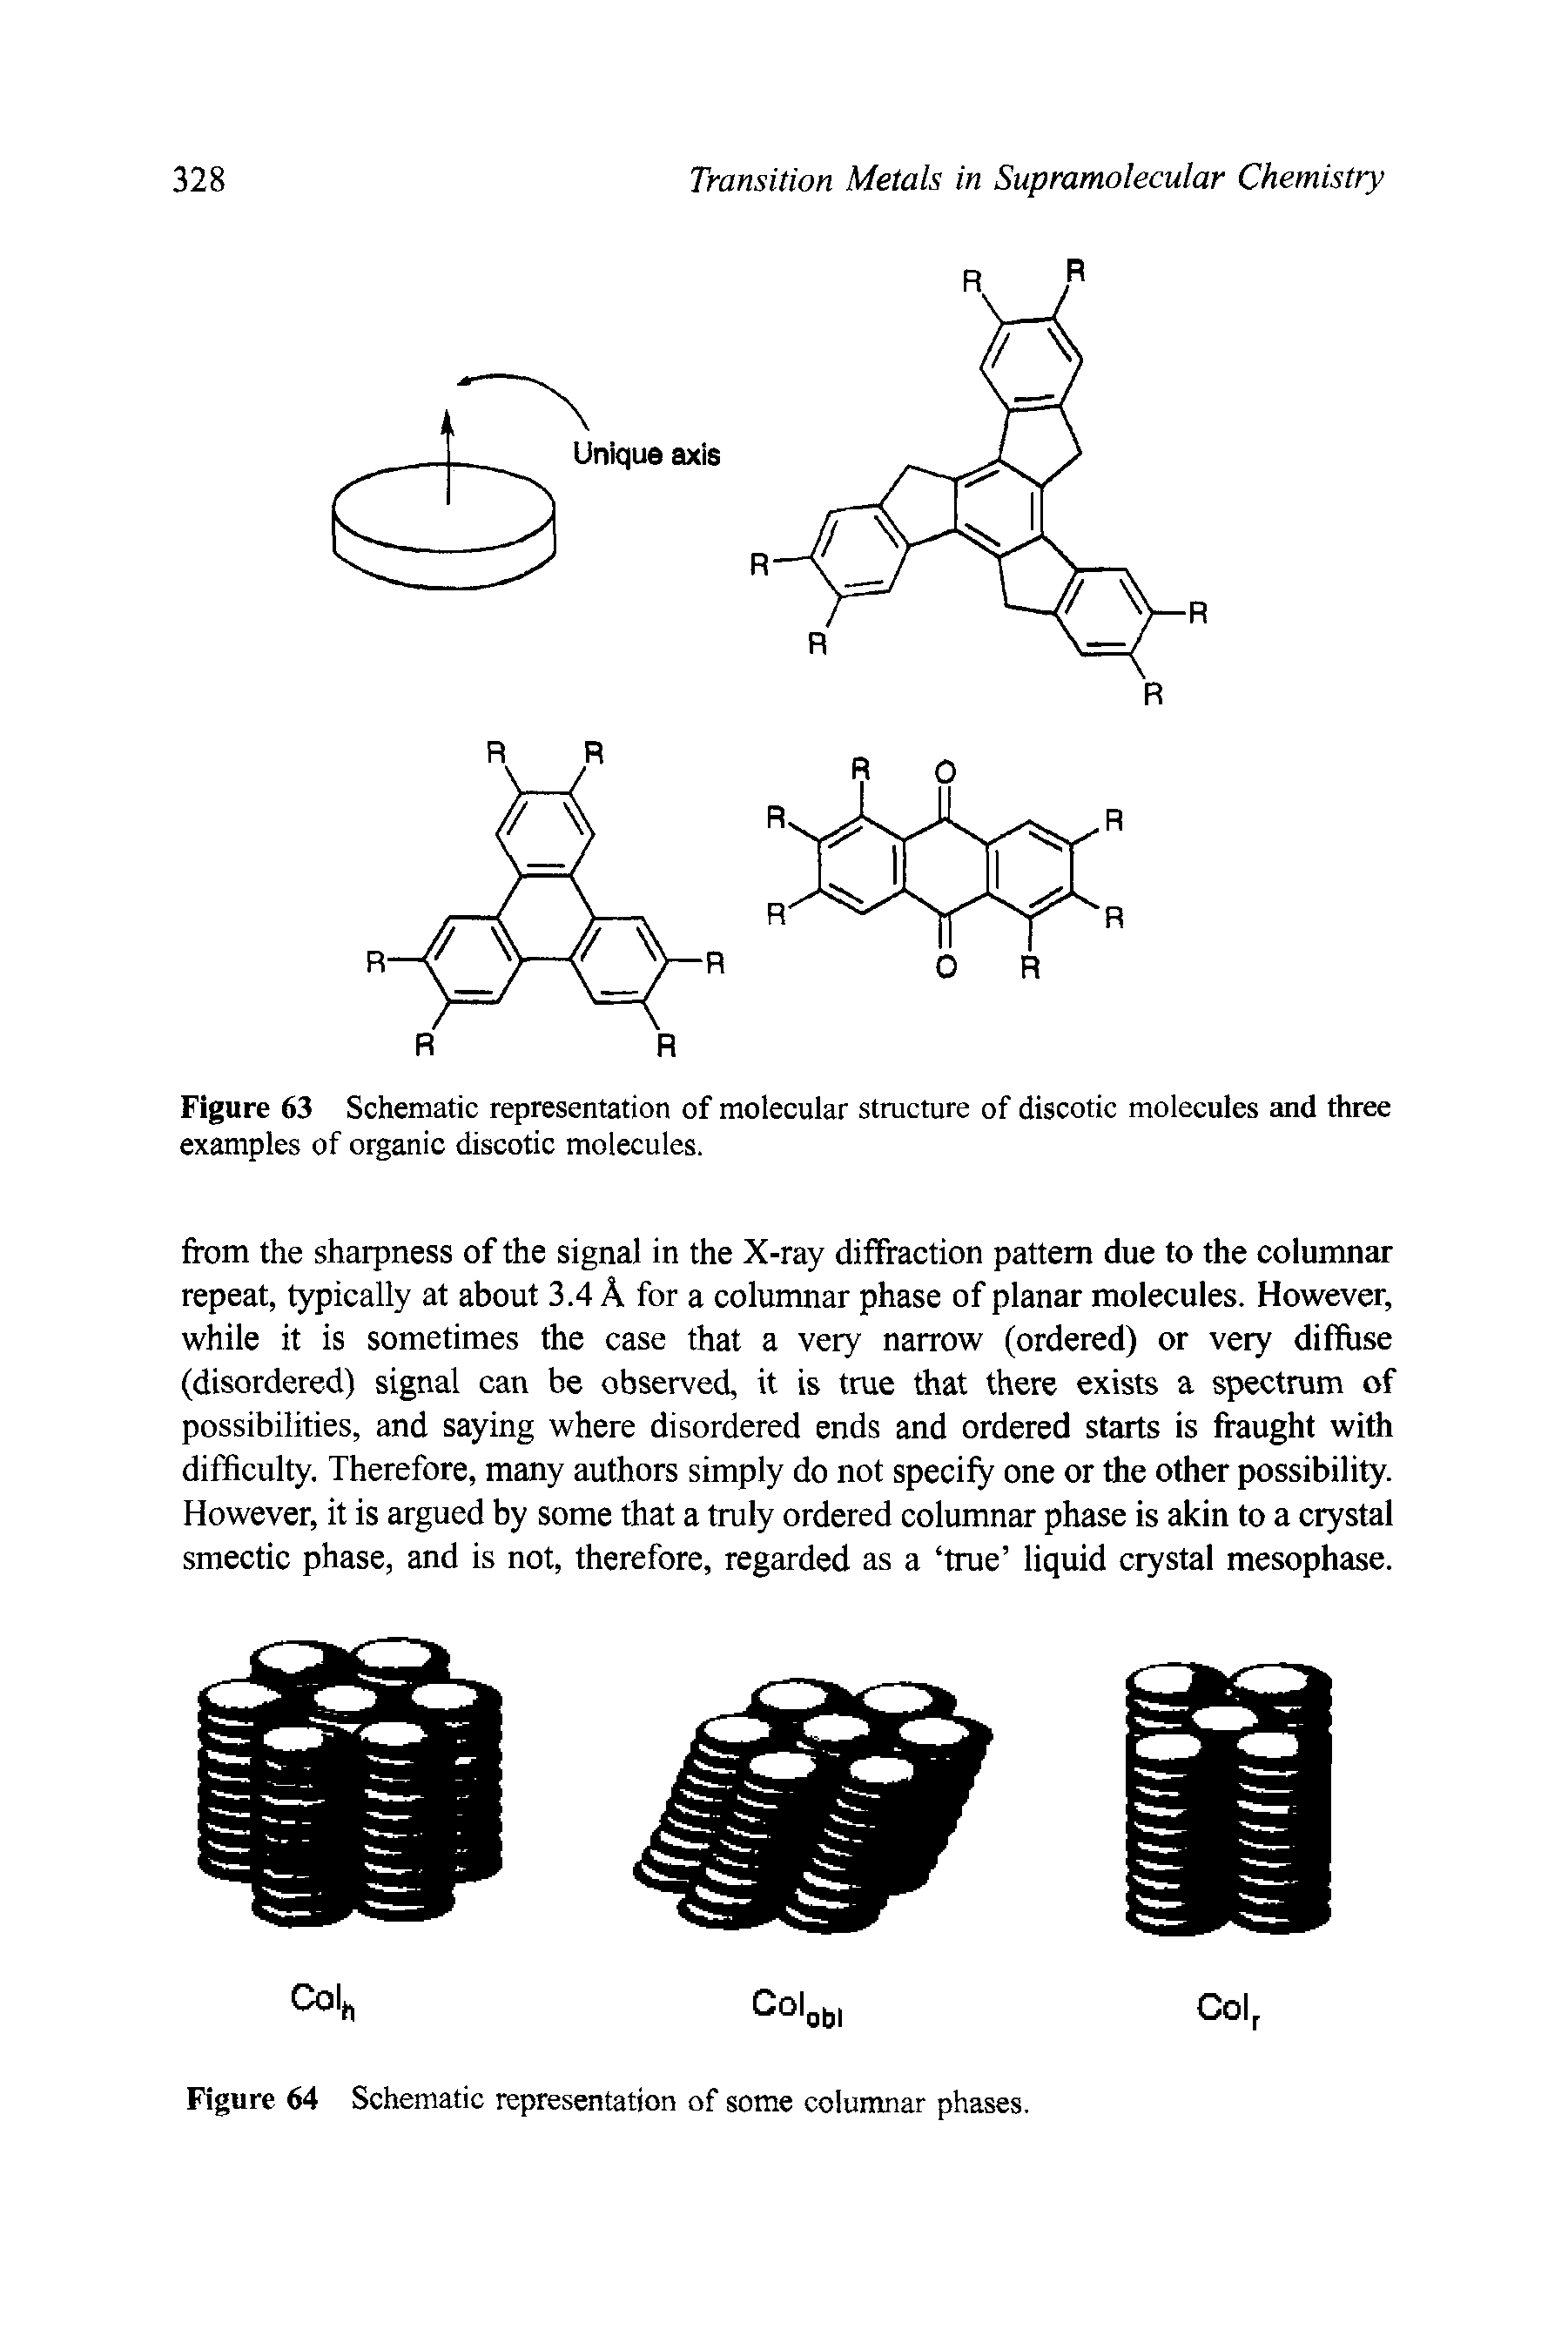 Figure 63 Schematic representation of molecular structure of discotic molecules and three examples of organic discotic molecules.